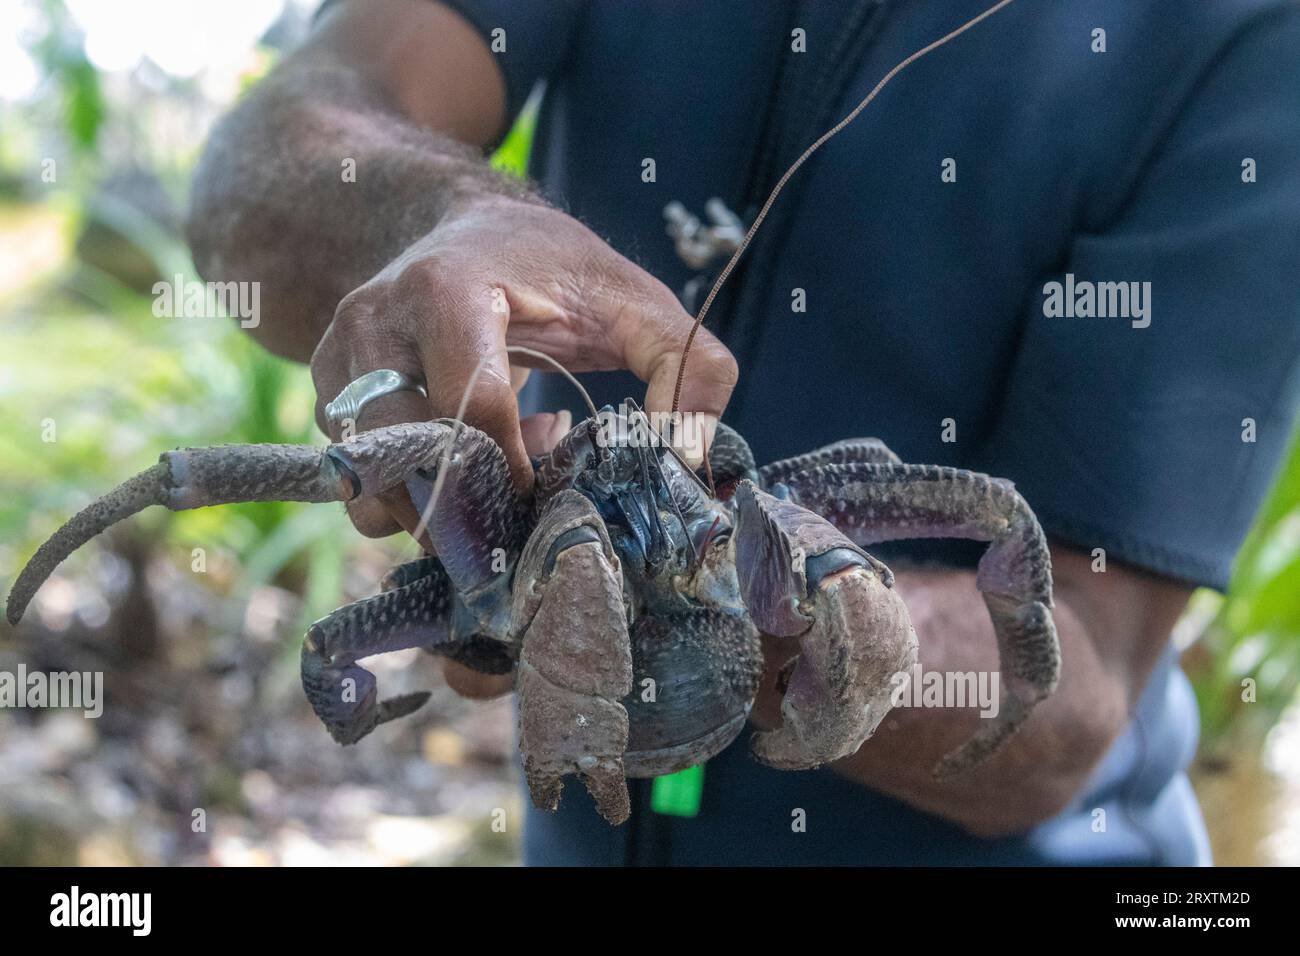 Local guide holding an adult coconut crab (Birgus latro), on land on Gam Island, Raja Ampat, Indonesia, Southeast Asia, Asia Stock Photo